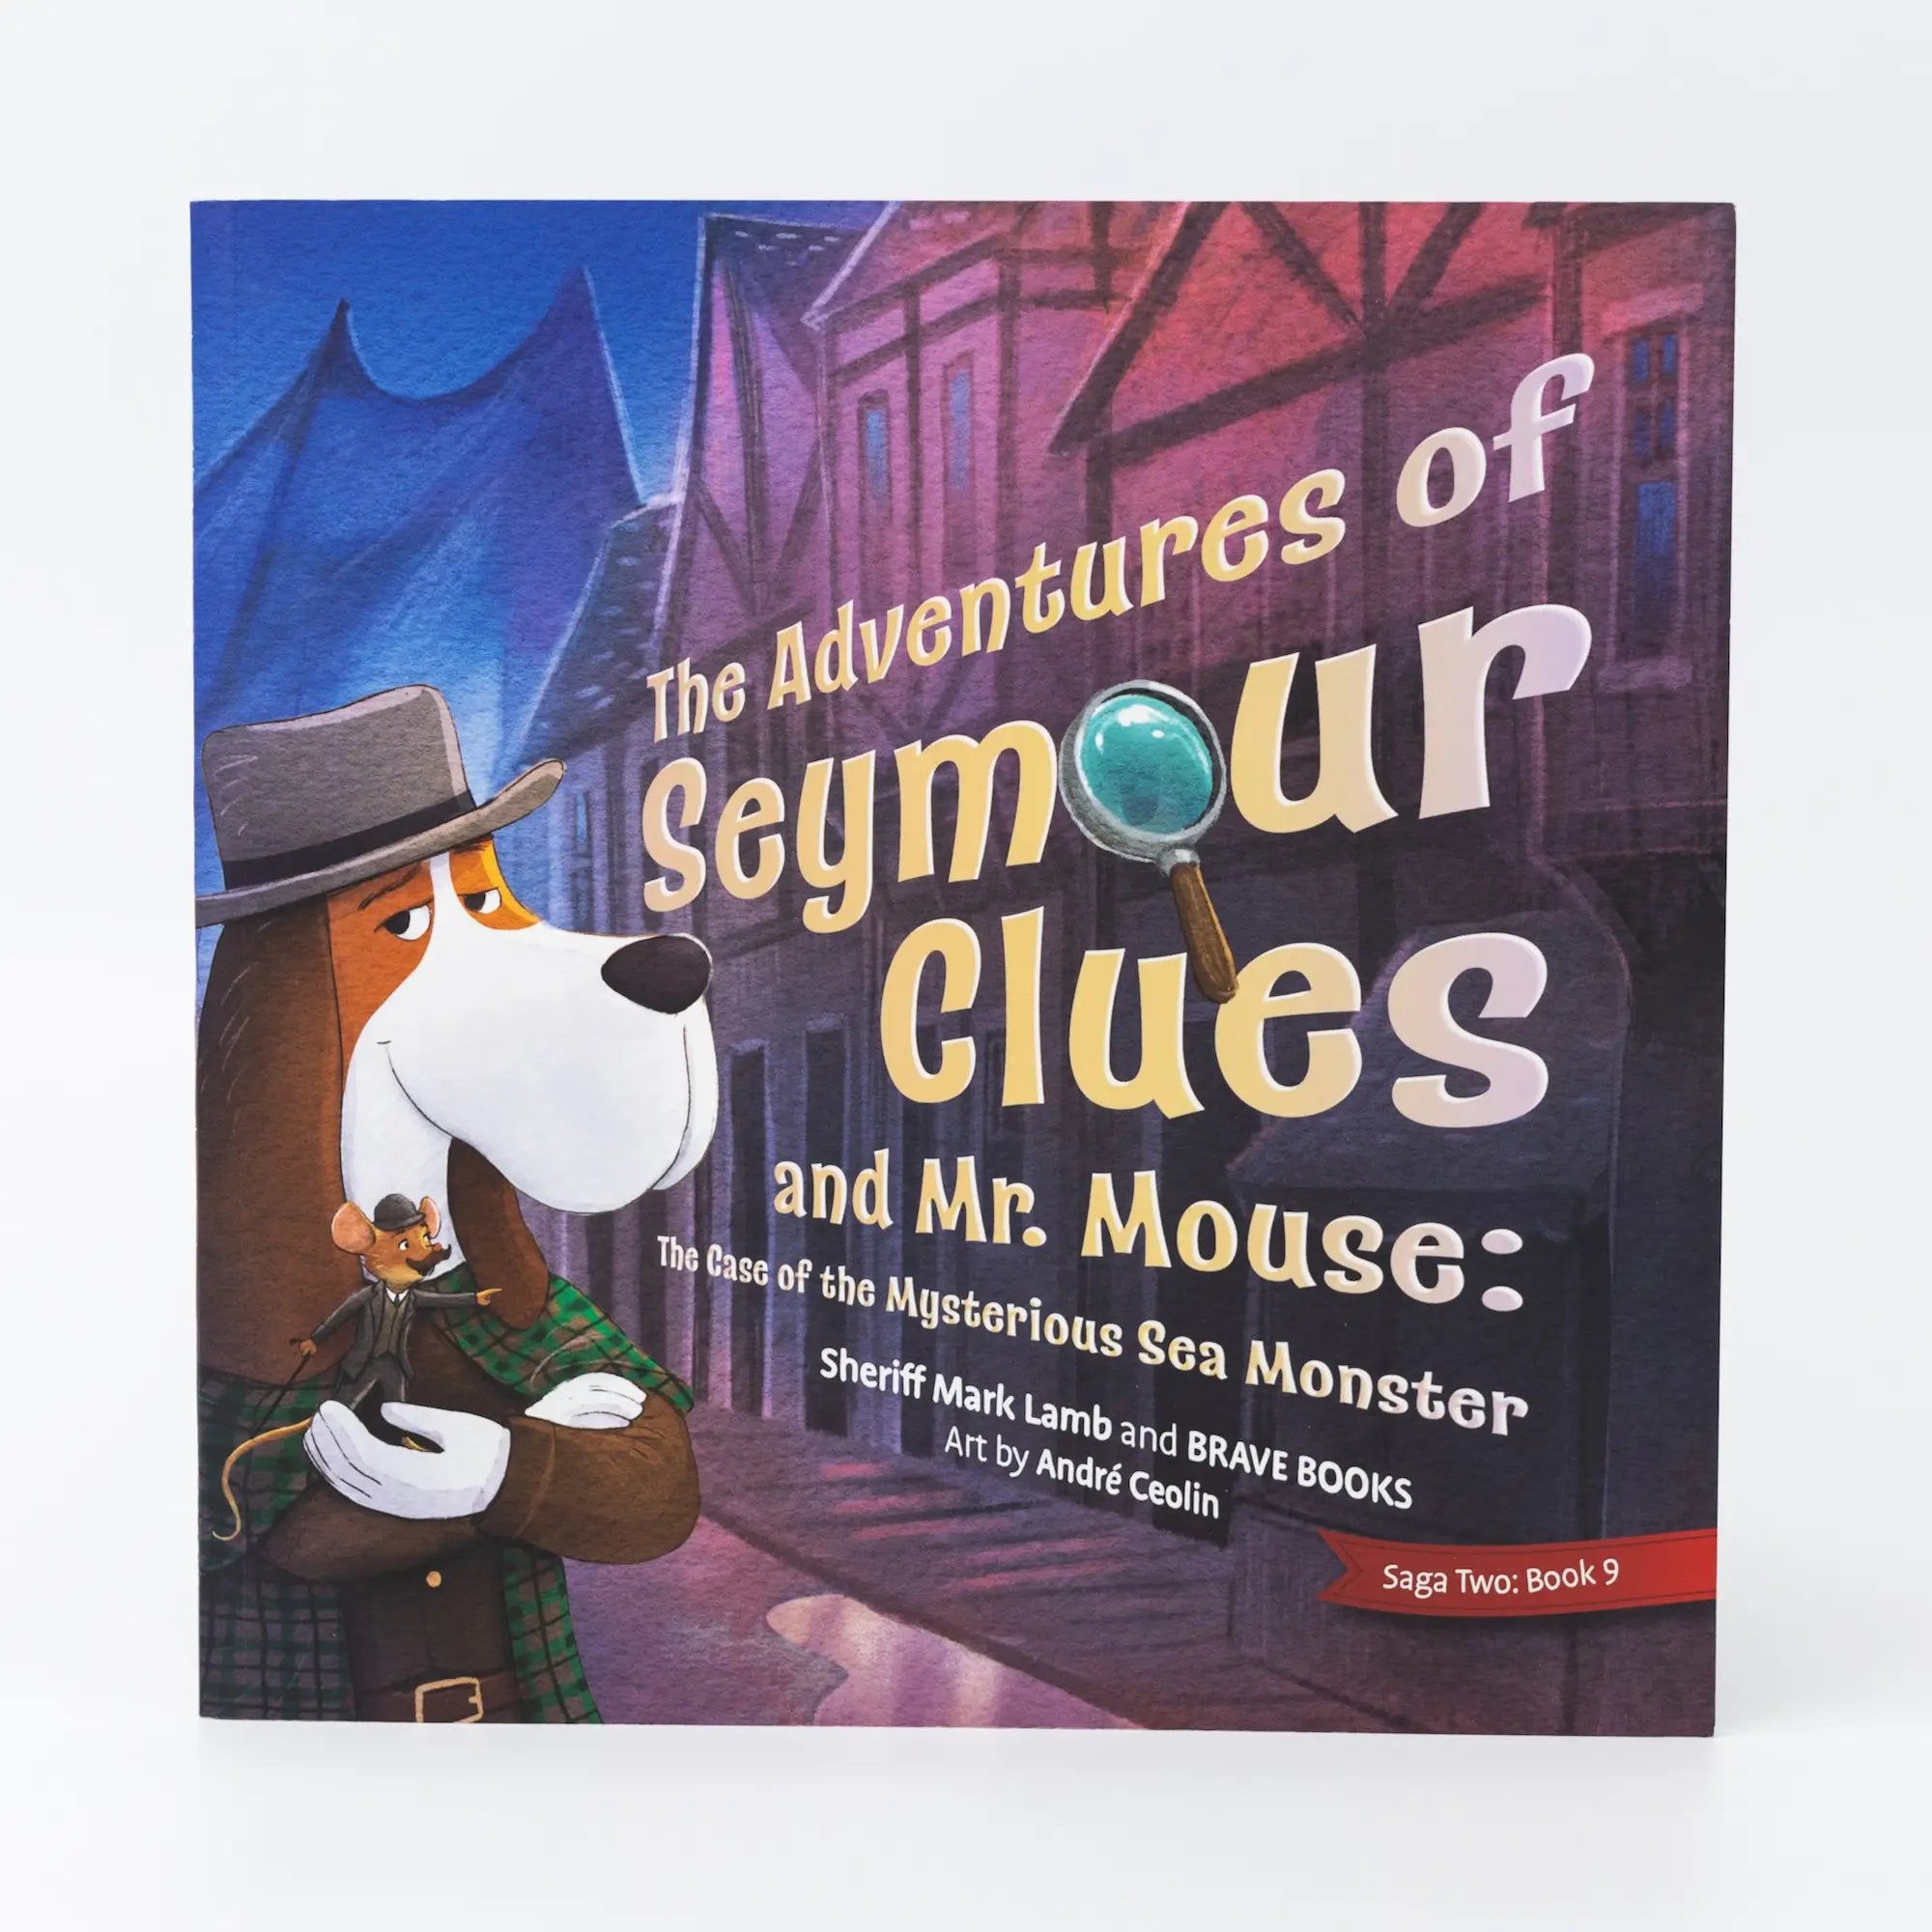 The Adventures of Seymour Clues & Mr. Mouse cover image